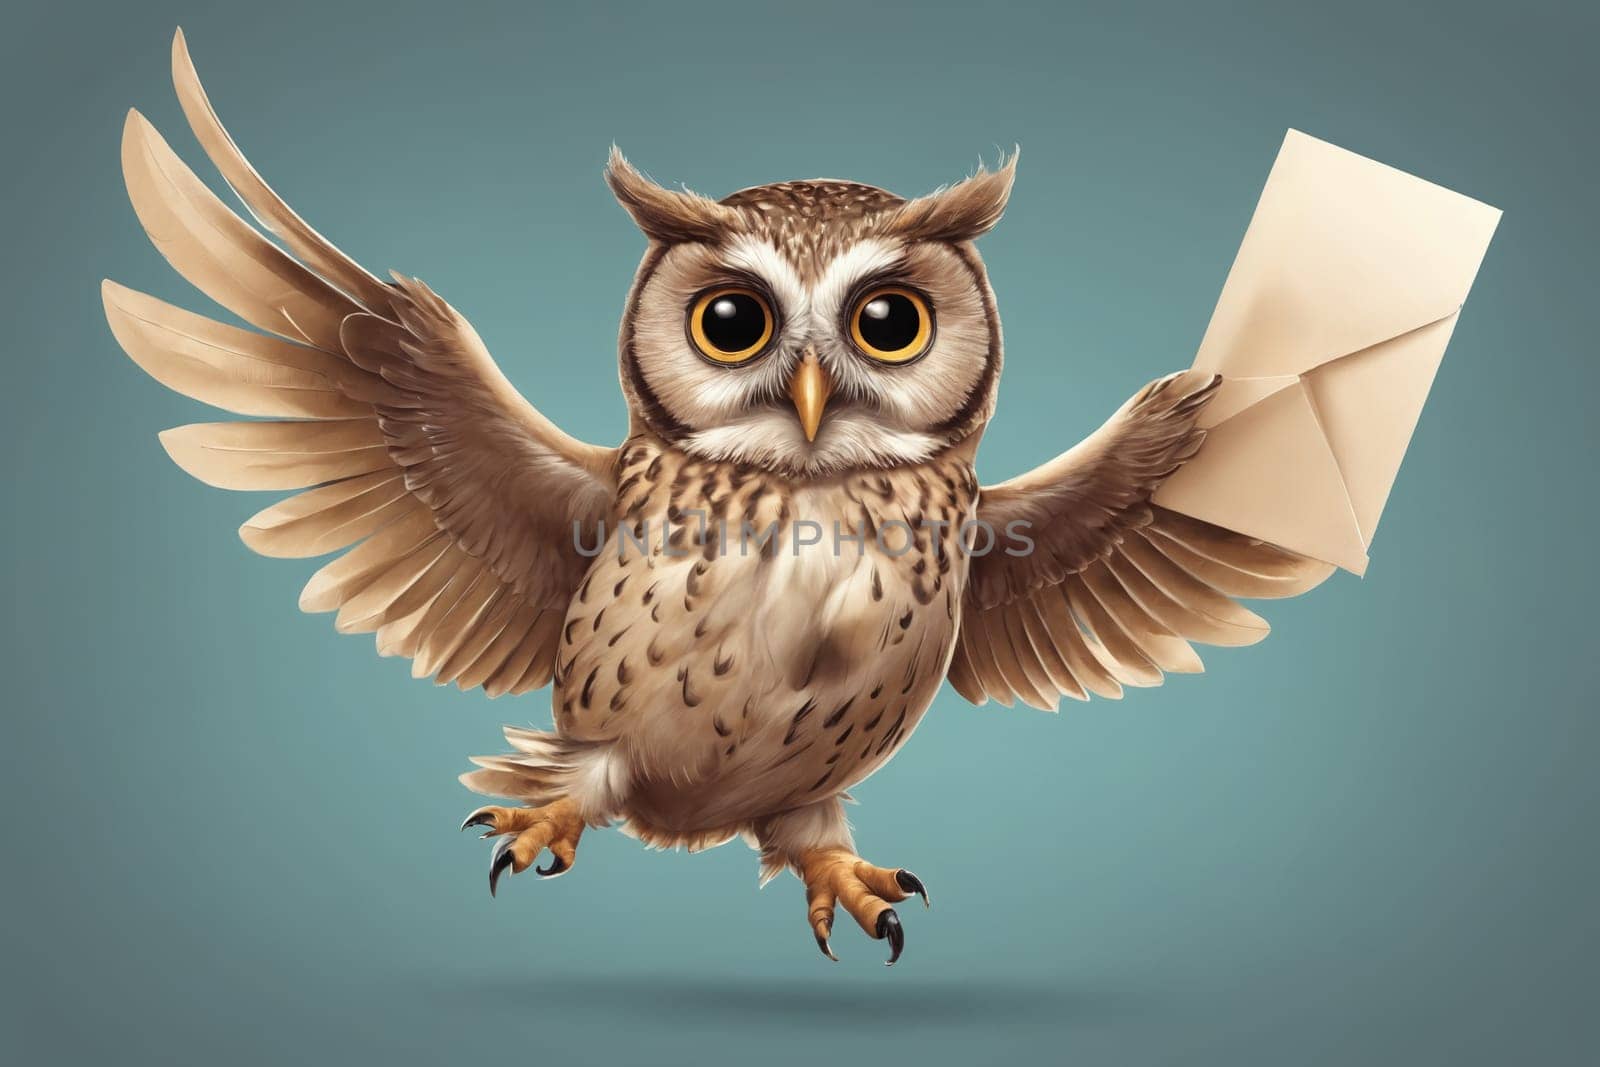 This illustration of an owl holding an envelope in its beak makes for a captivating visual, ideal for showcasing themes of communication, wisdom, or magical fantasy.